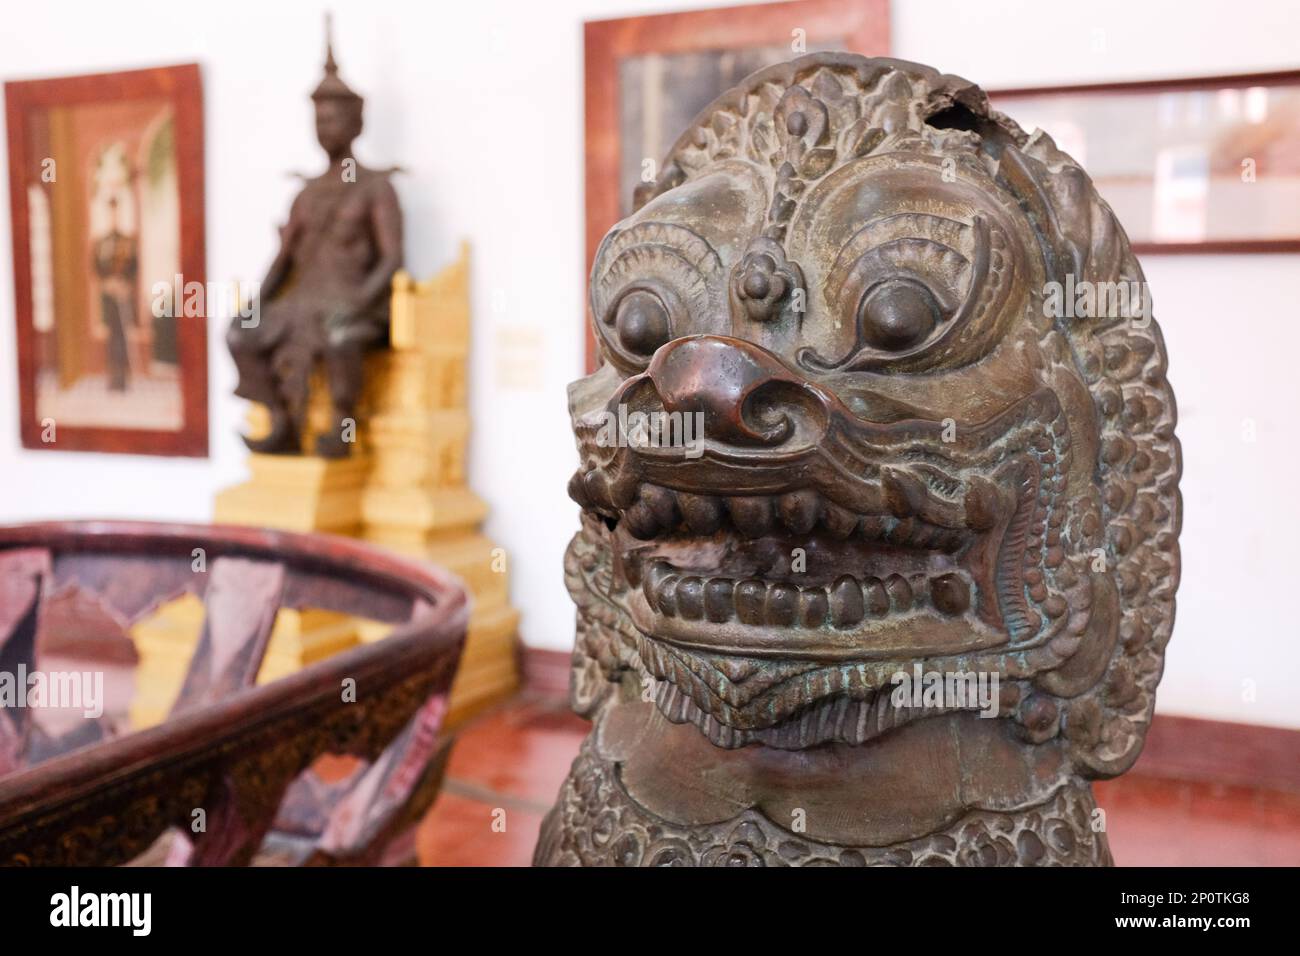 Ancient Khmer mythical lion guardian statue in National Museum of Cambodia, Pnomh Penh. Travel photo, museum collection Stock Photo